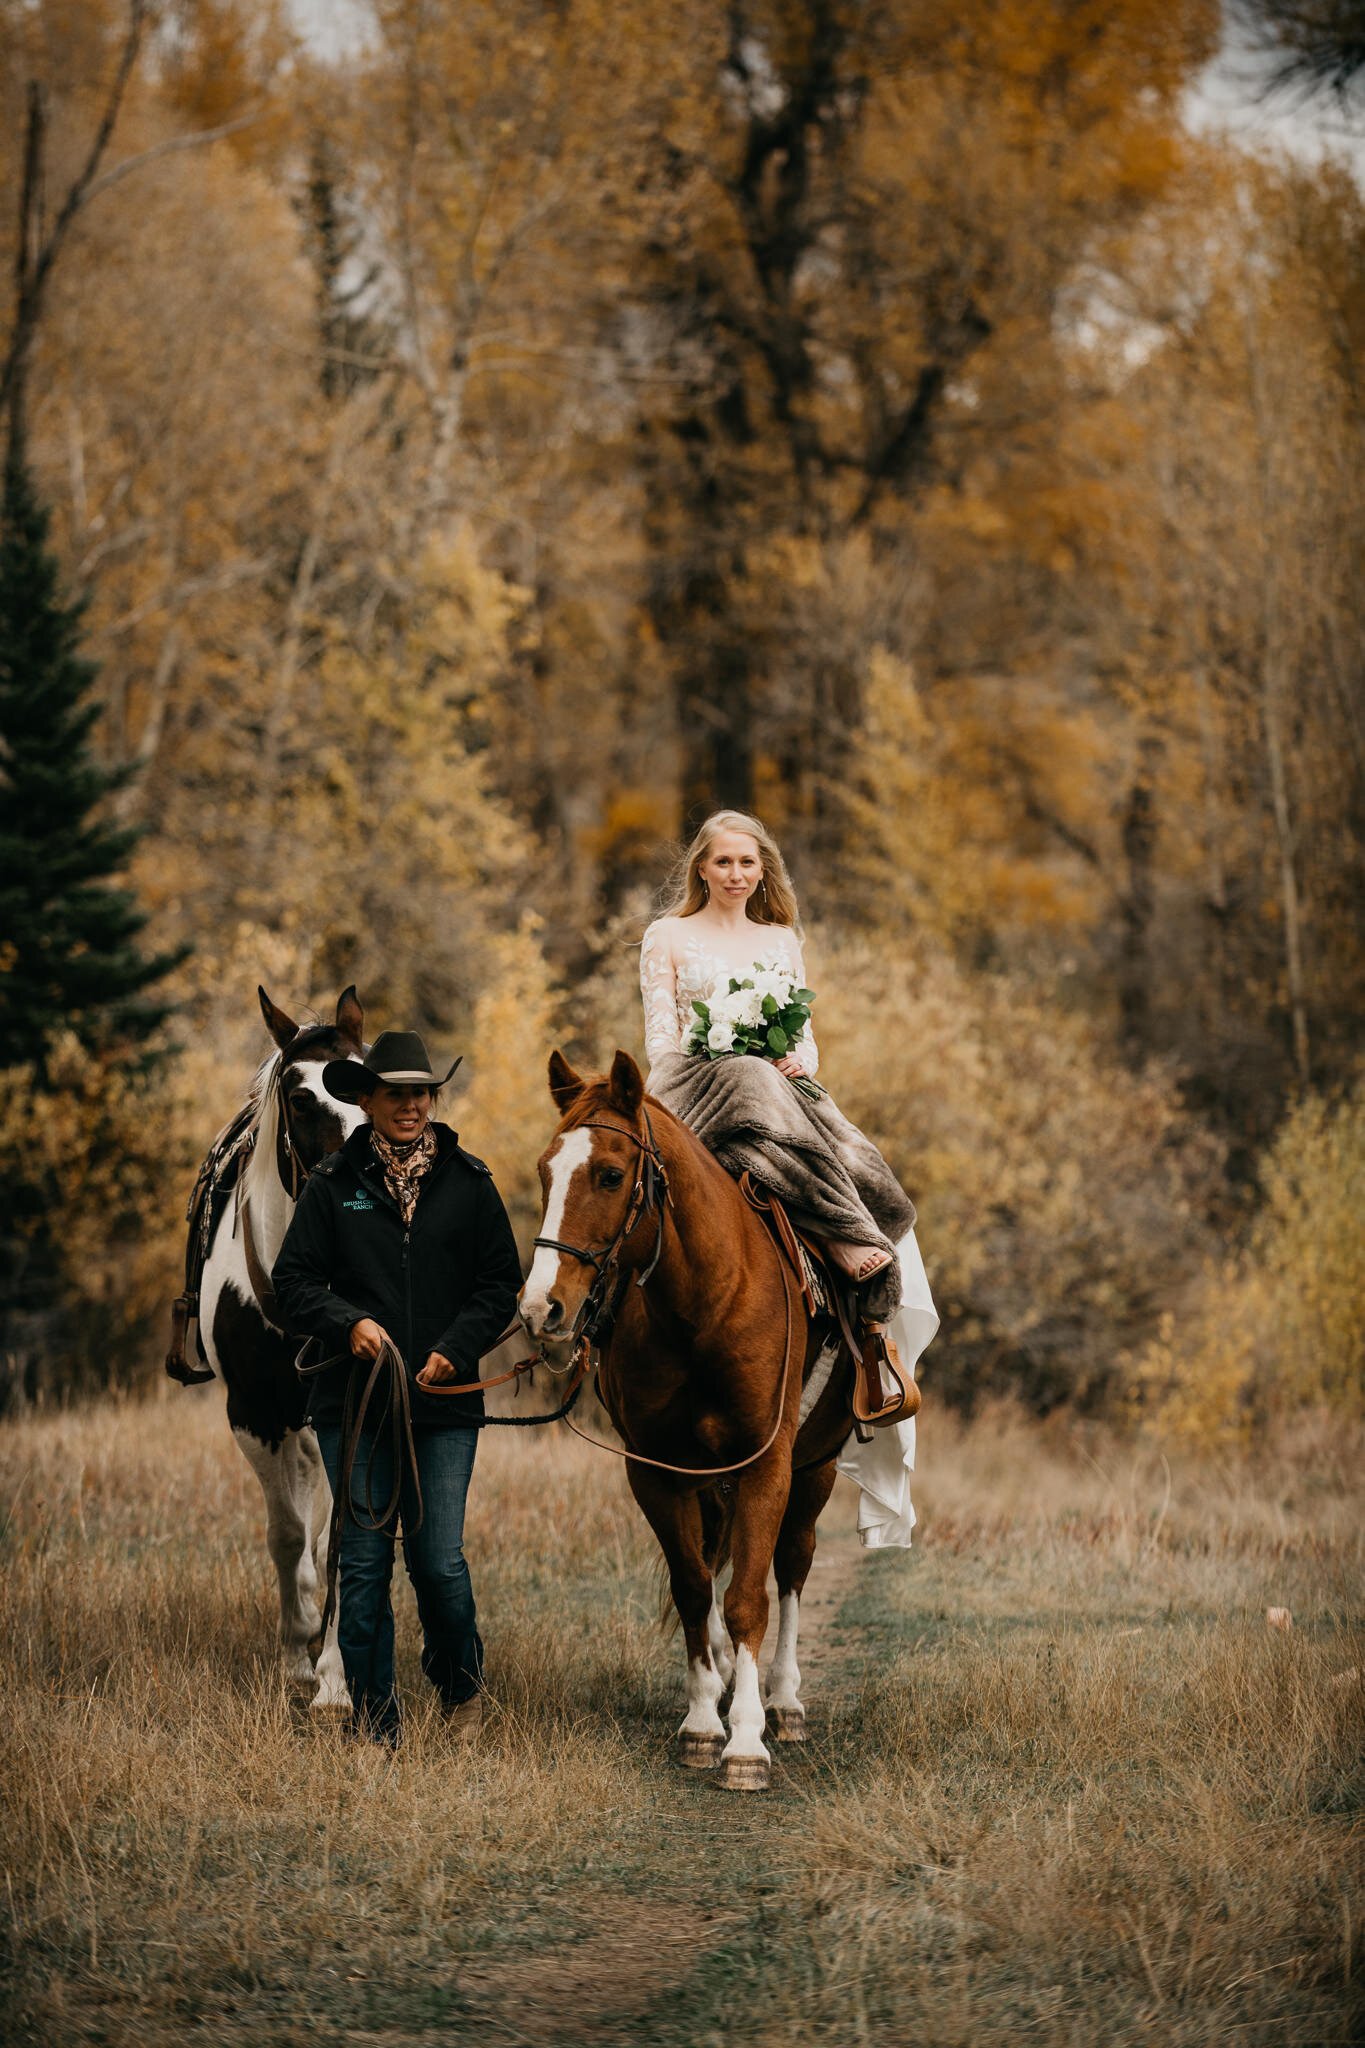 Bride in wedding dress riding side saddle on horse to ceremony site in grassy field with autumn colors in the trees in back ground. 